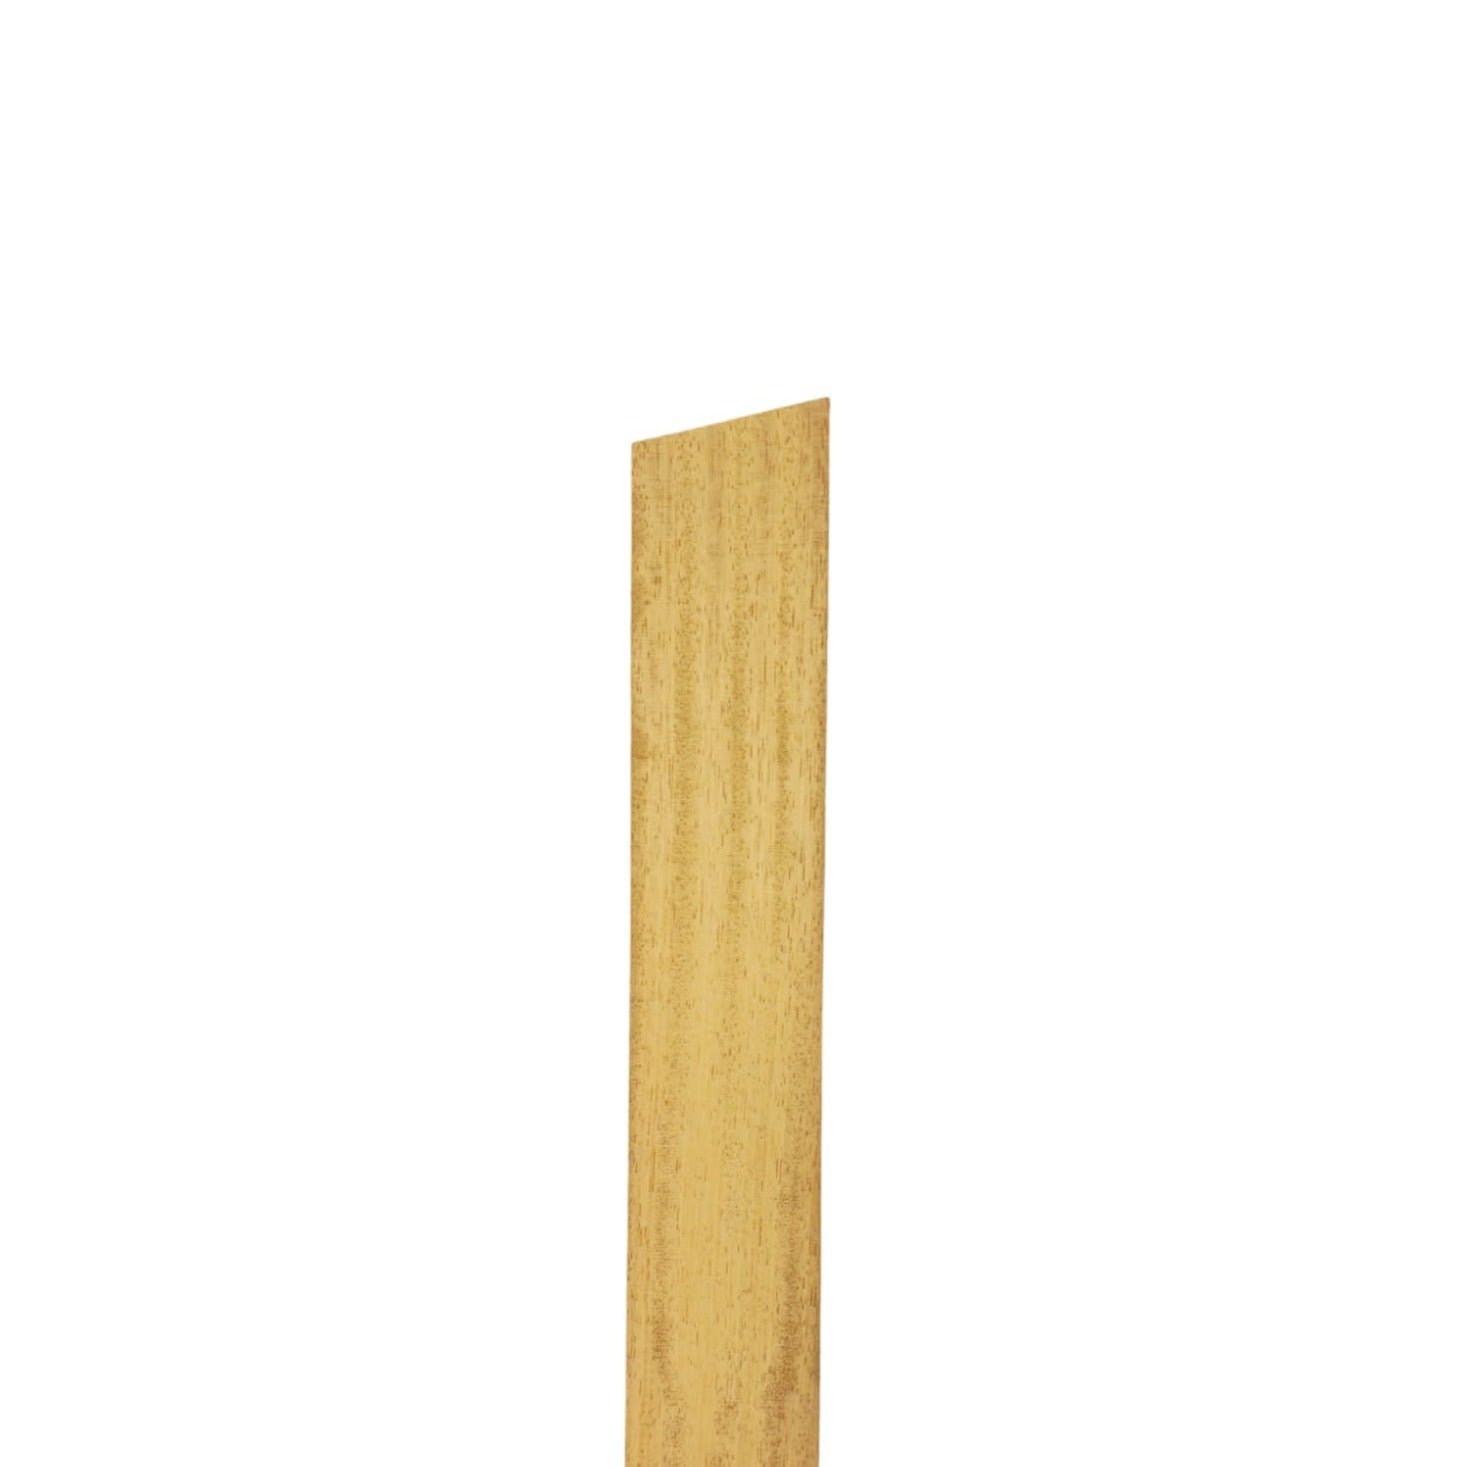 The side view of a light coloured wall post made of Iroko wood, measuring 95mm x 70mm